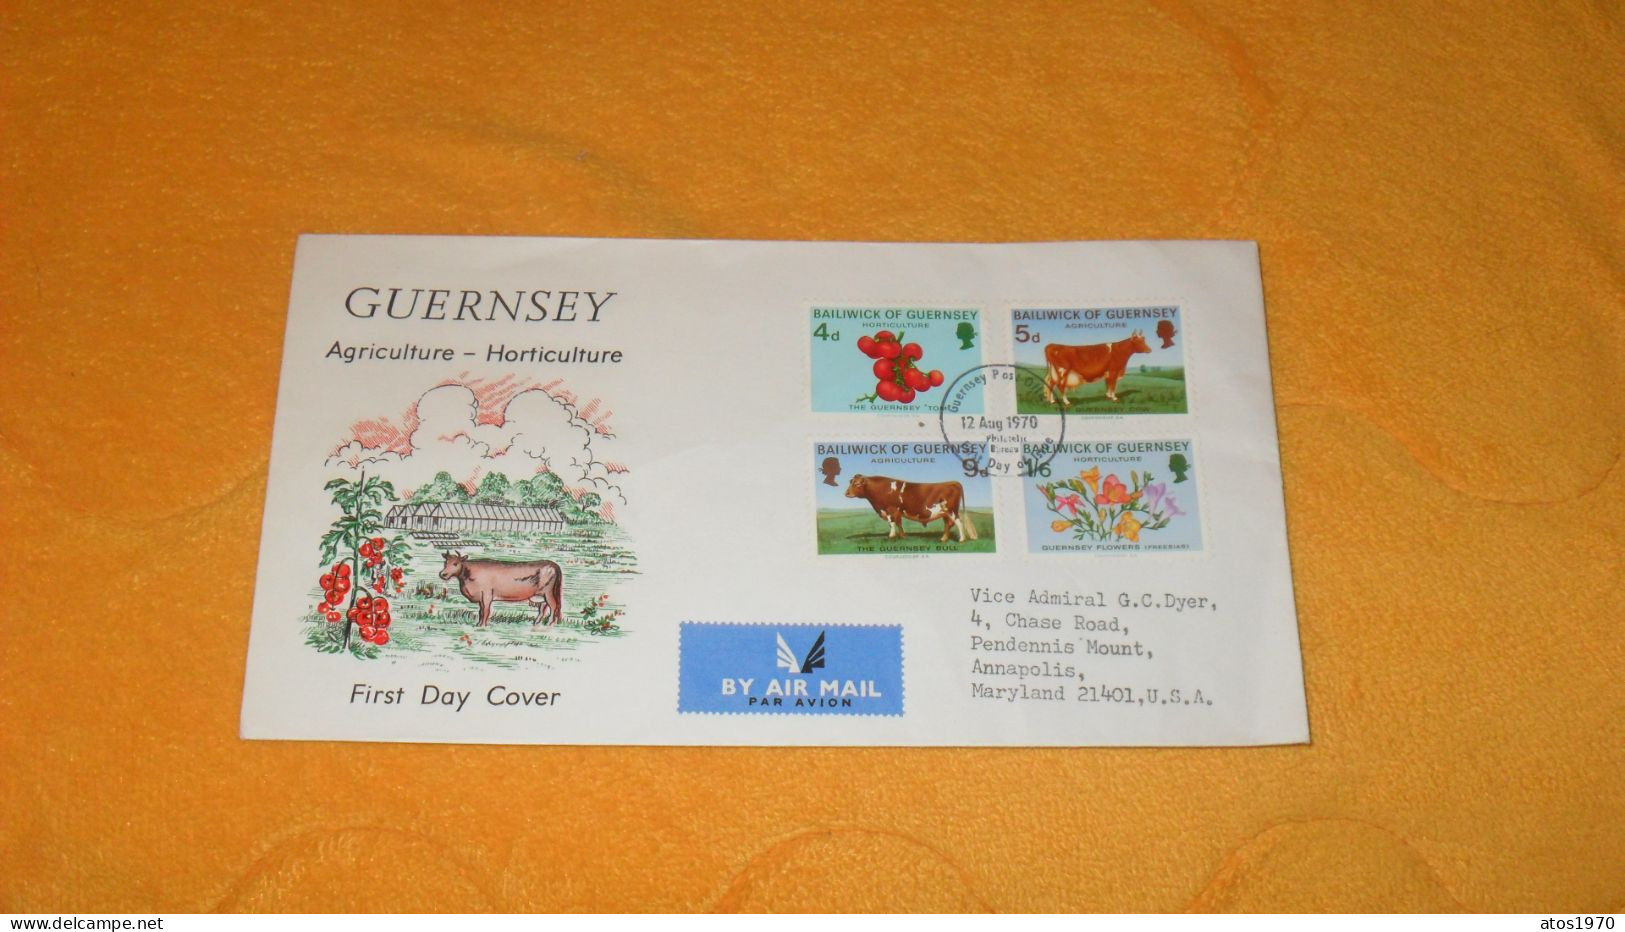 ENVELOPPE FDC DE 1970../ GUERNSEY AGRICULTURE HORTICULTURE...CACHET + TIMBRES X4 - 1952-1971 Pre-Decimale Uitgaves